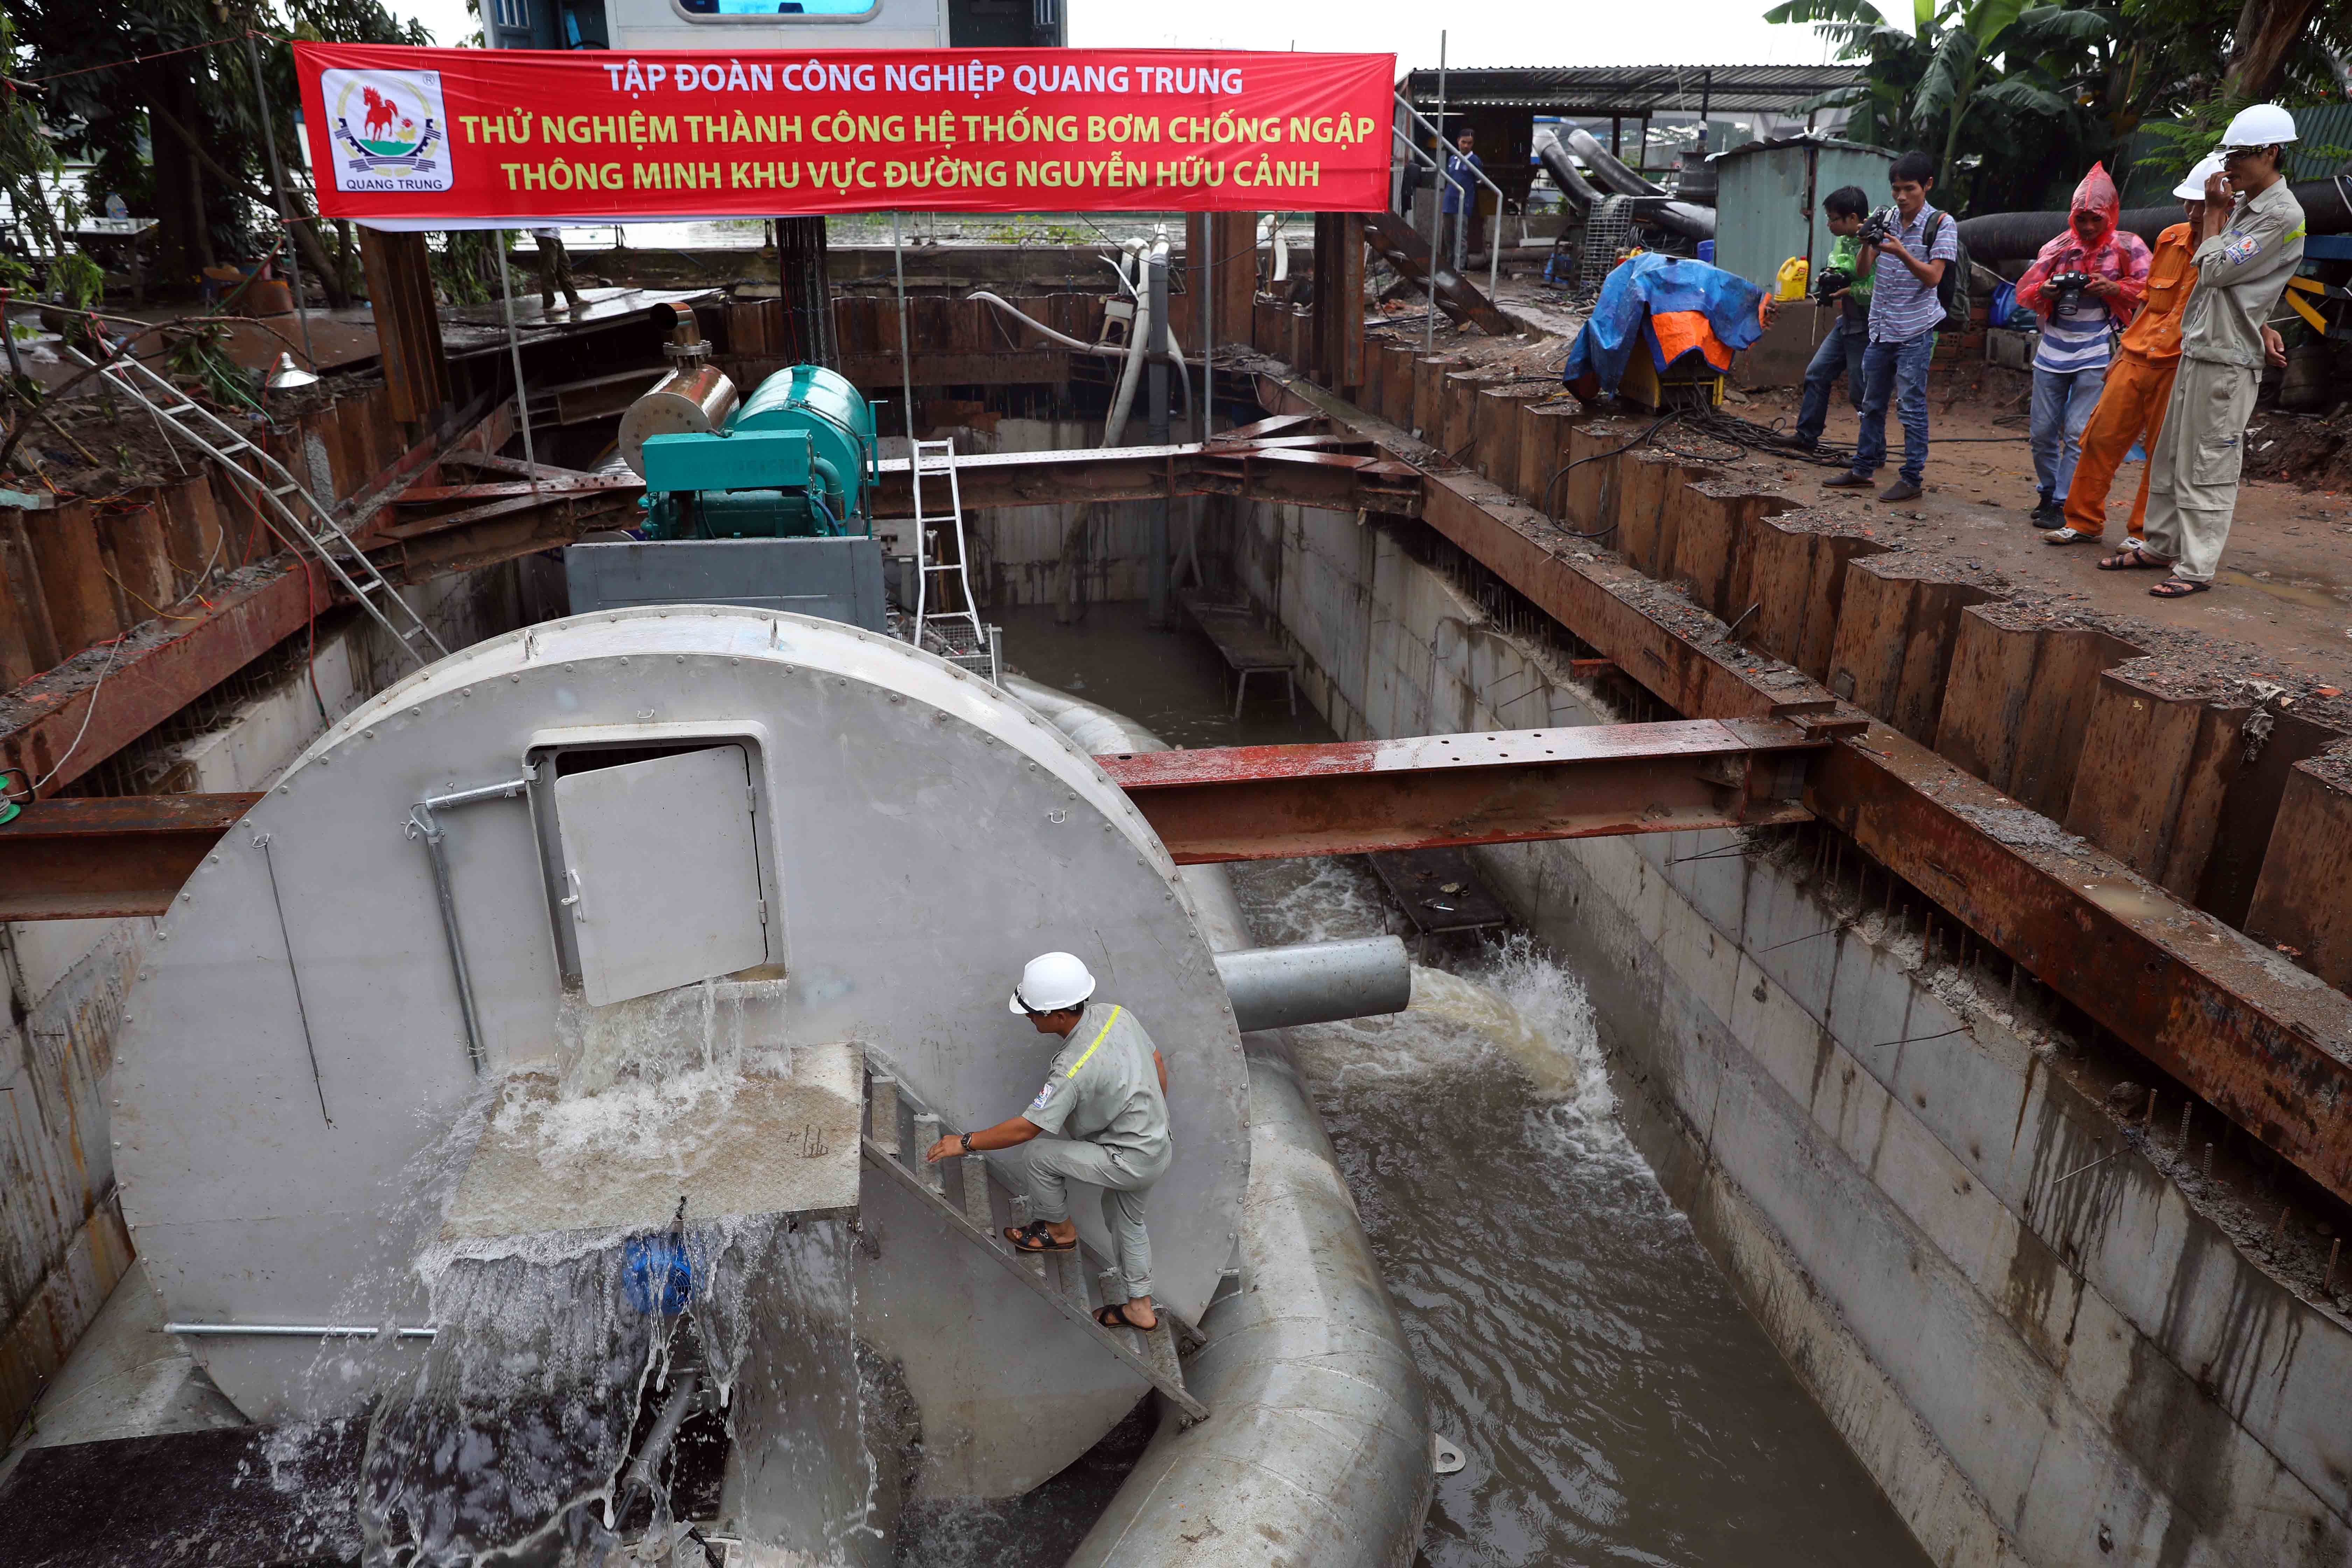 ​Anti-flood system clears inundated Saigon street in just 15 minutes